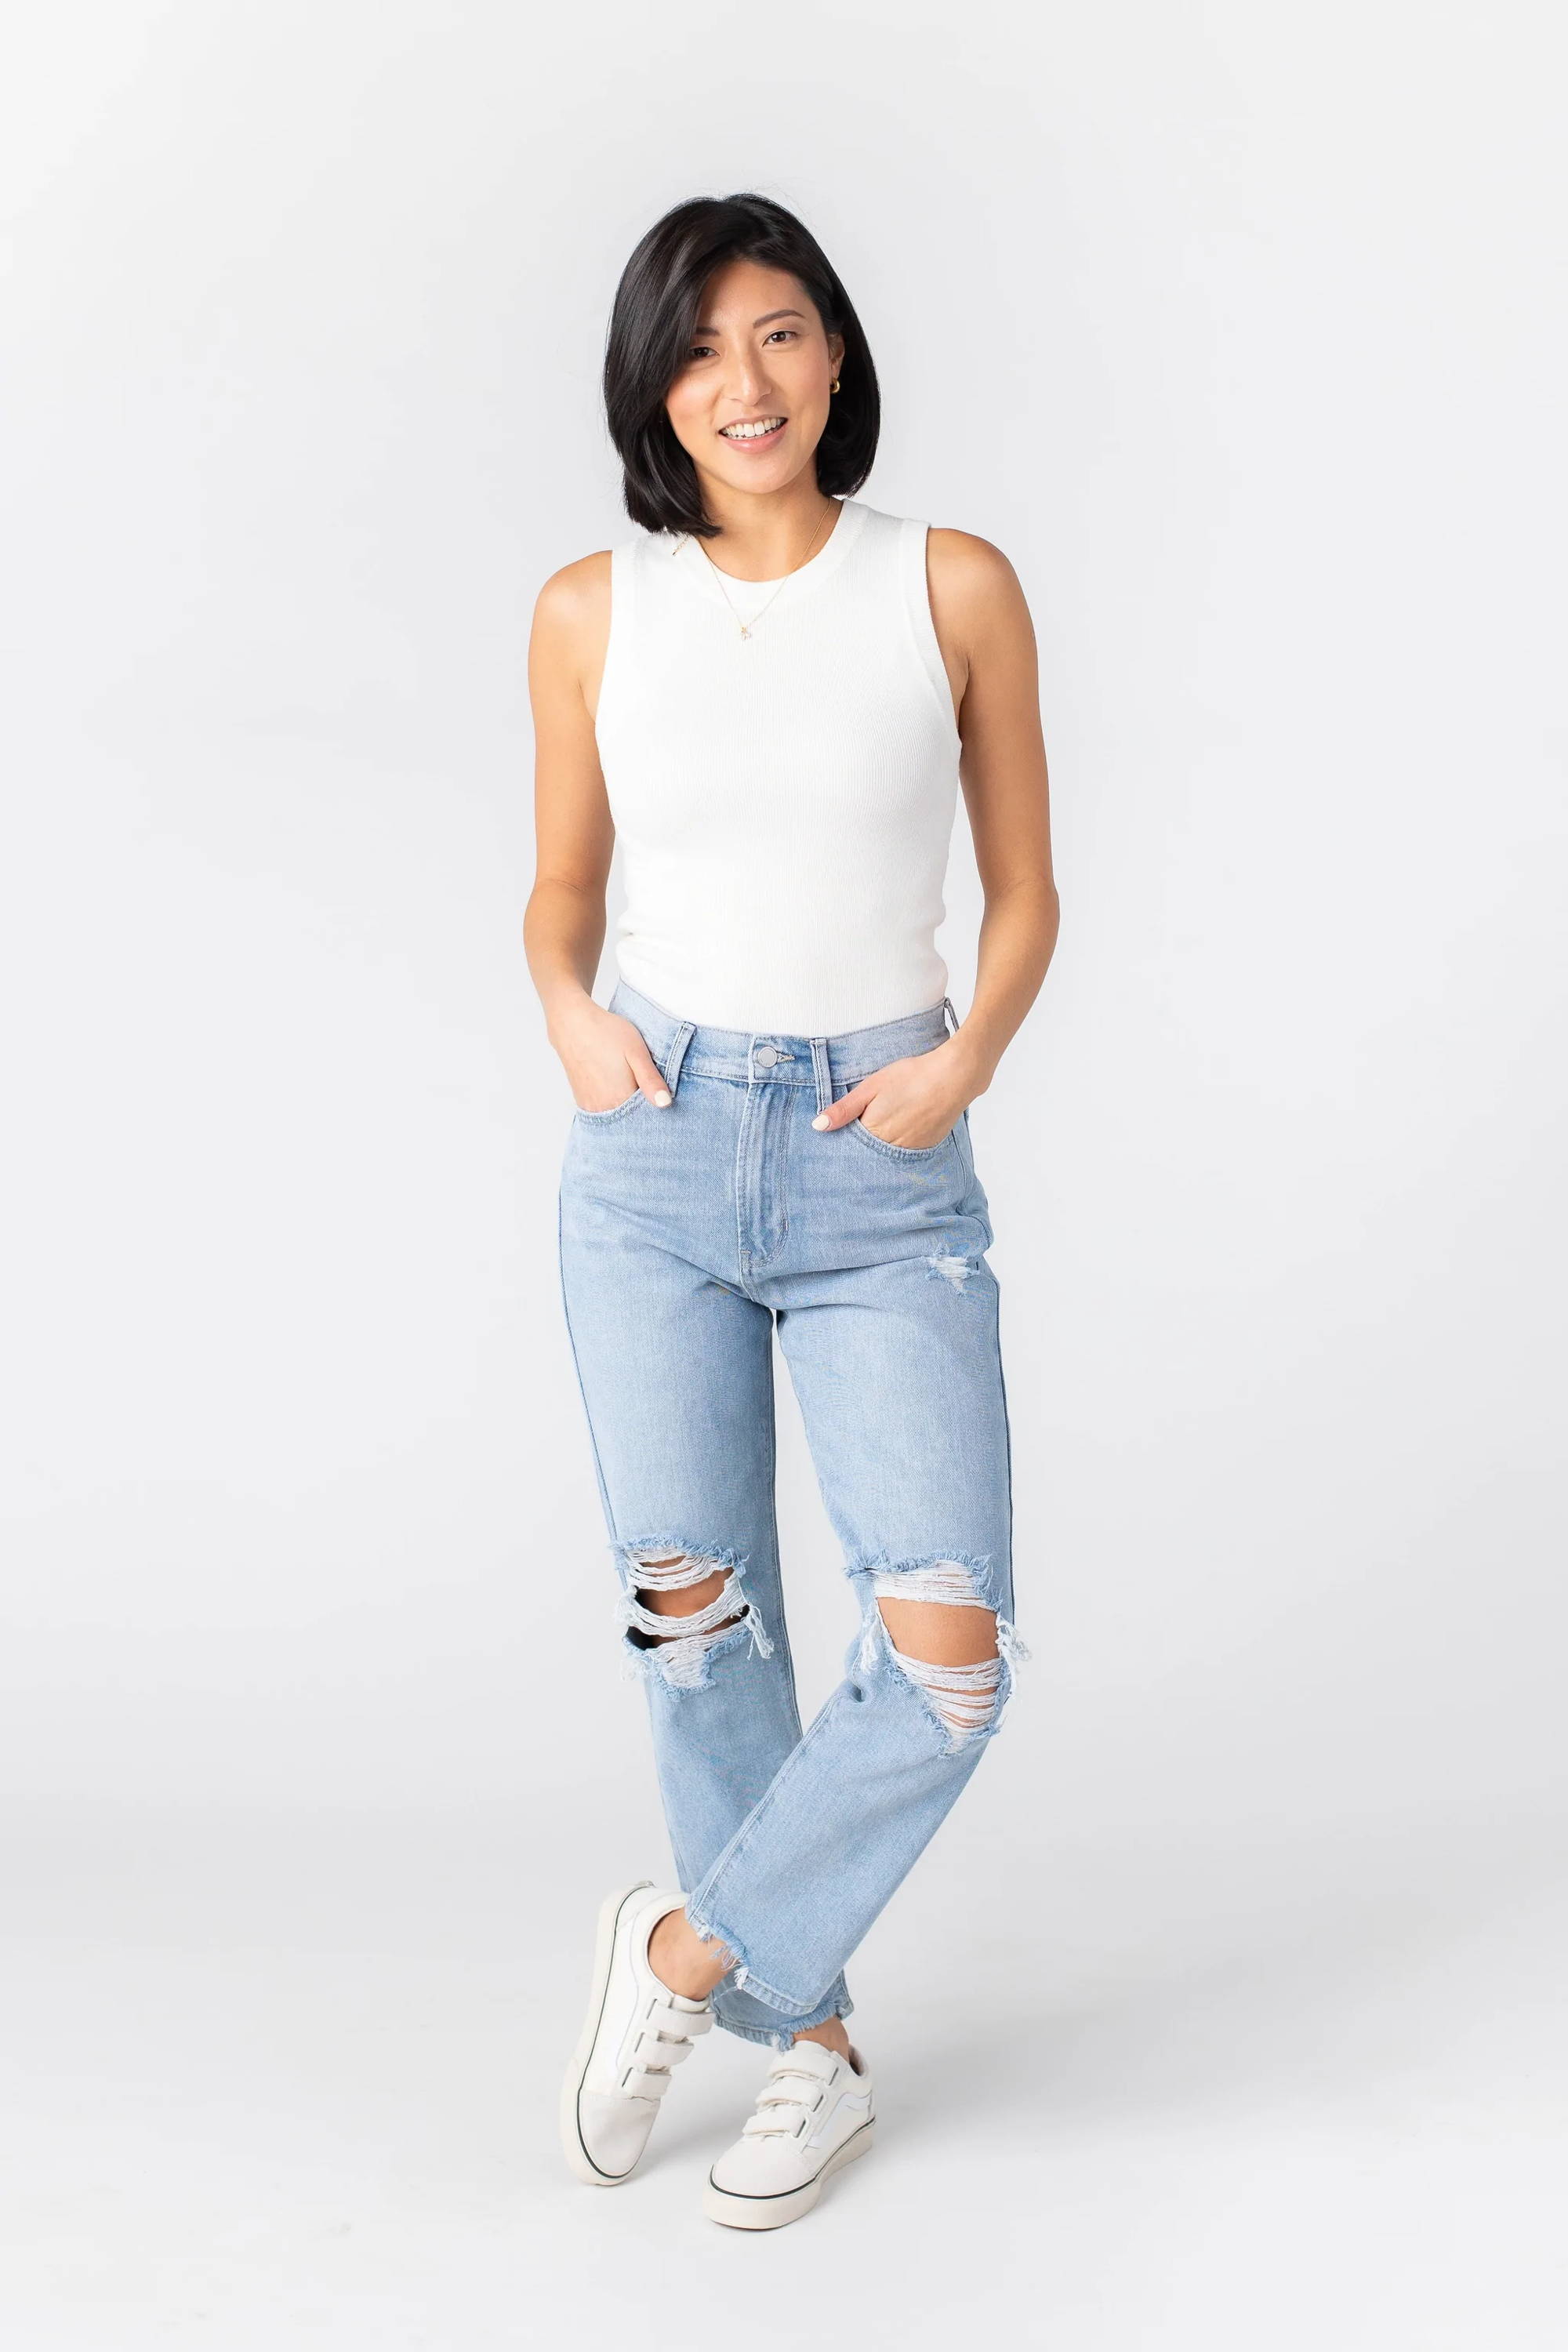 A woman poses in distressed straight-leg jeans